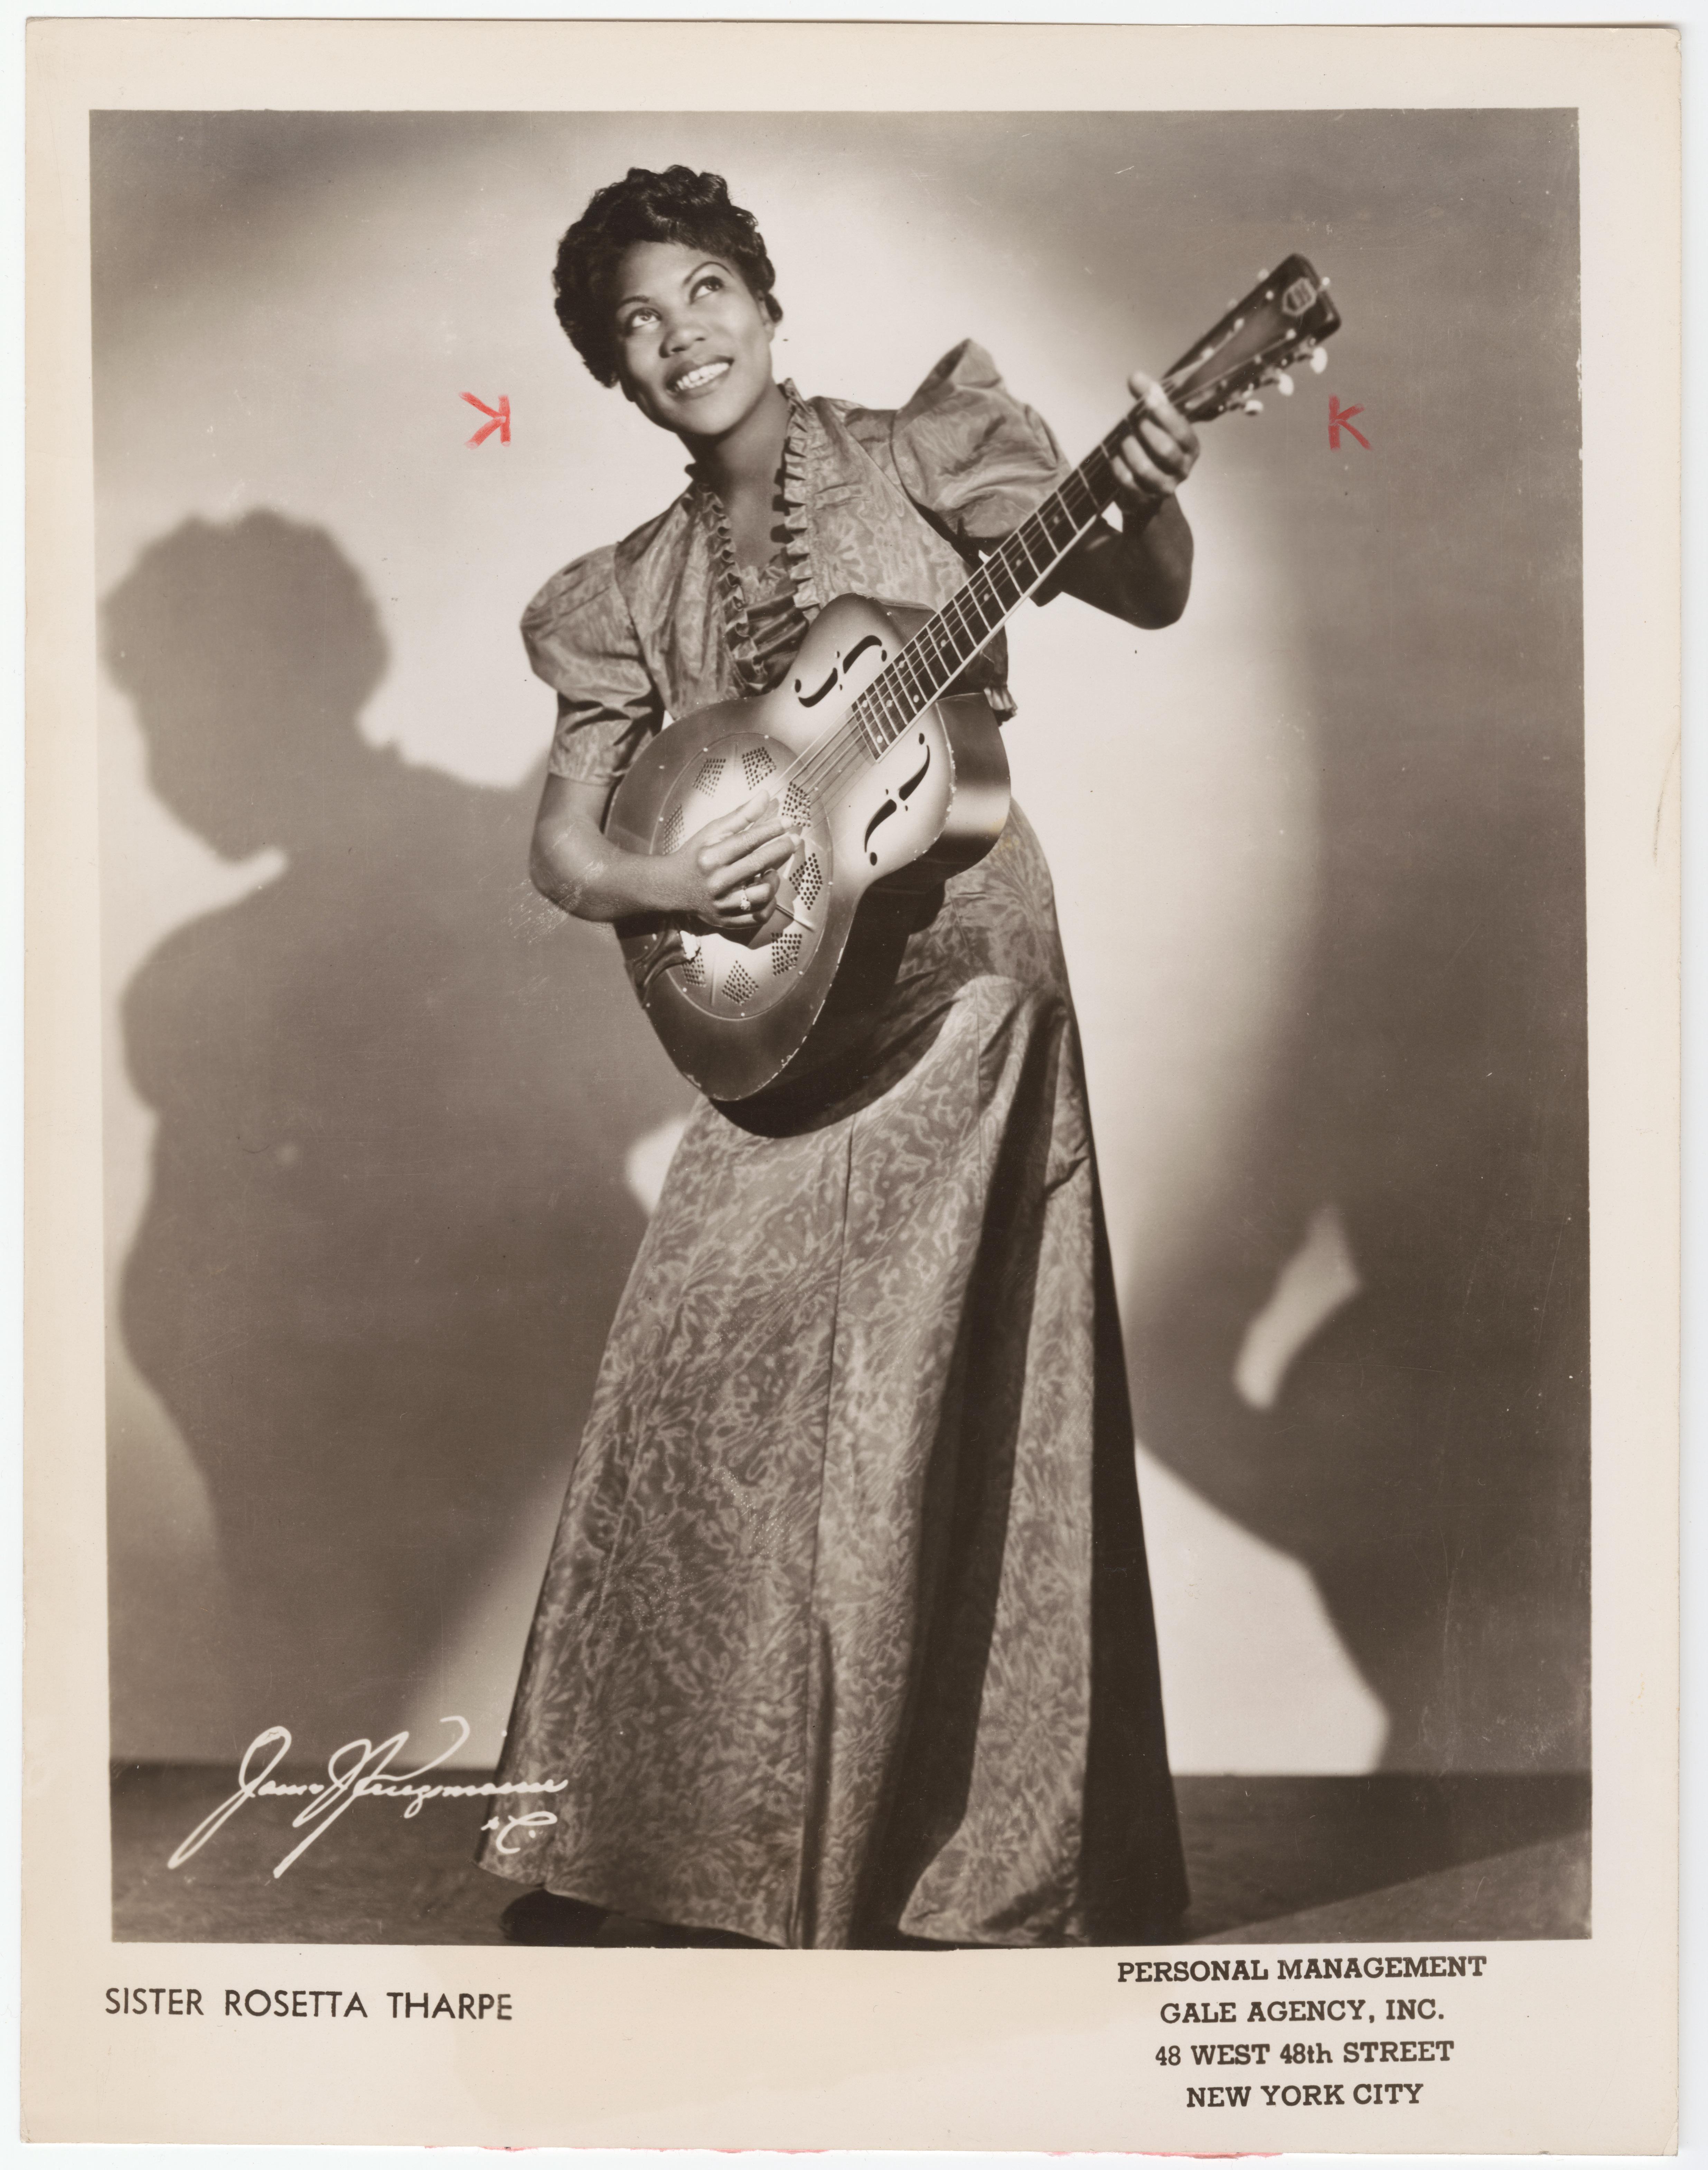 Untrimmed promotional image of Sister Rosetta Tharpe with guitar.